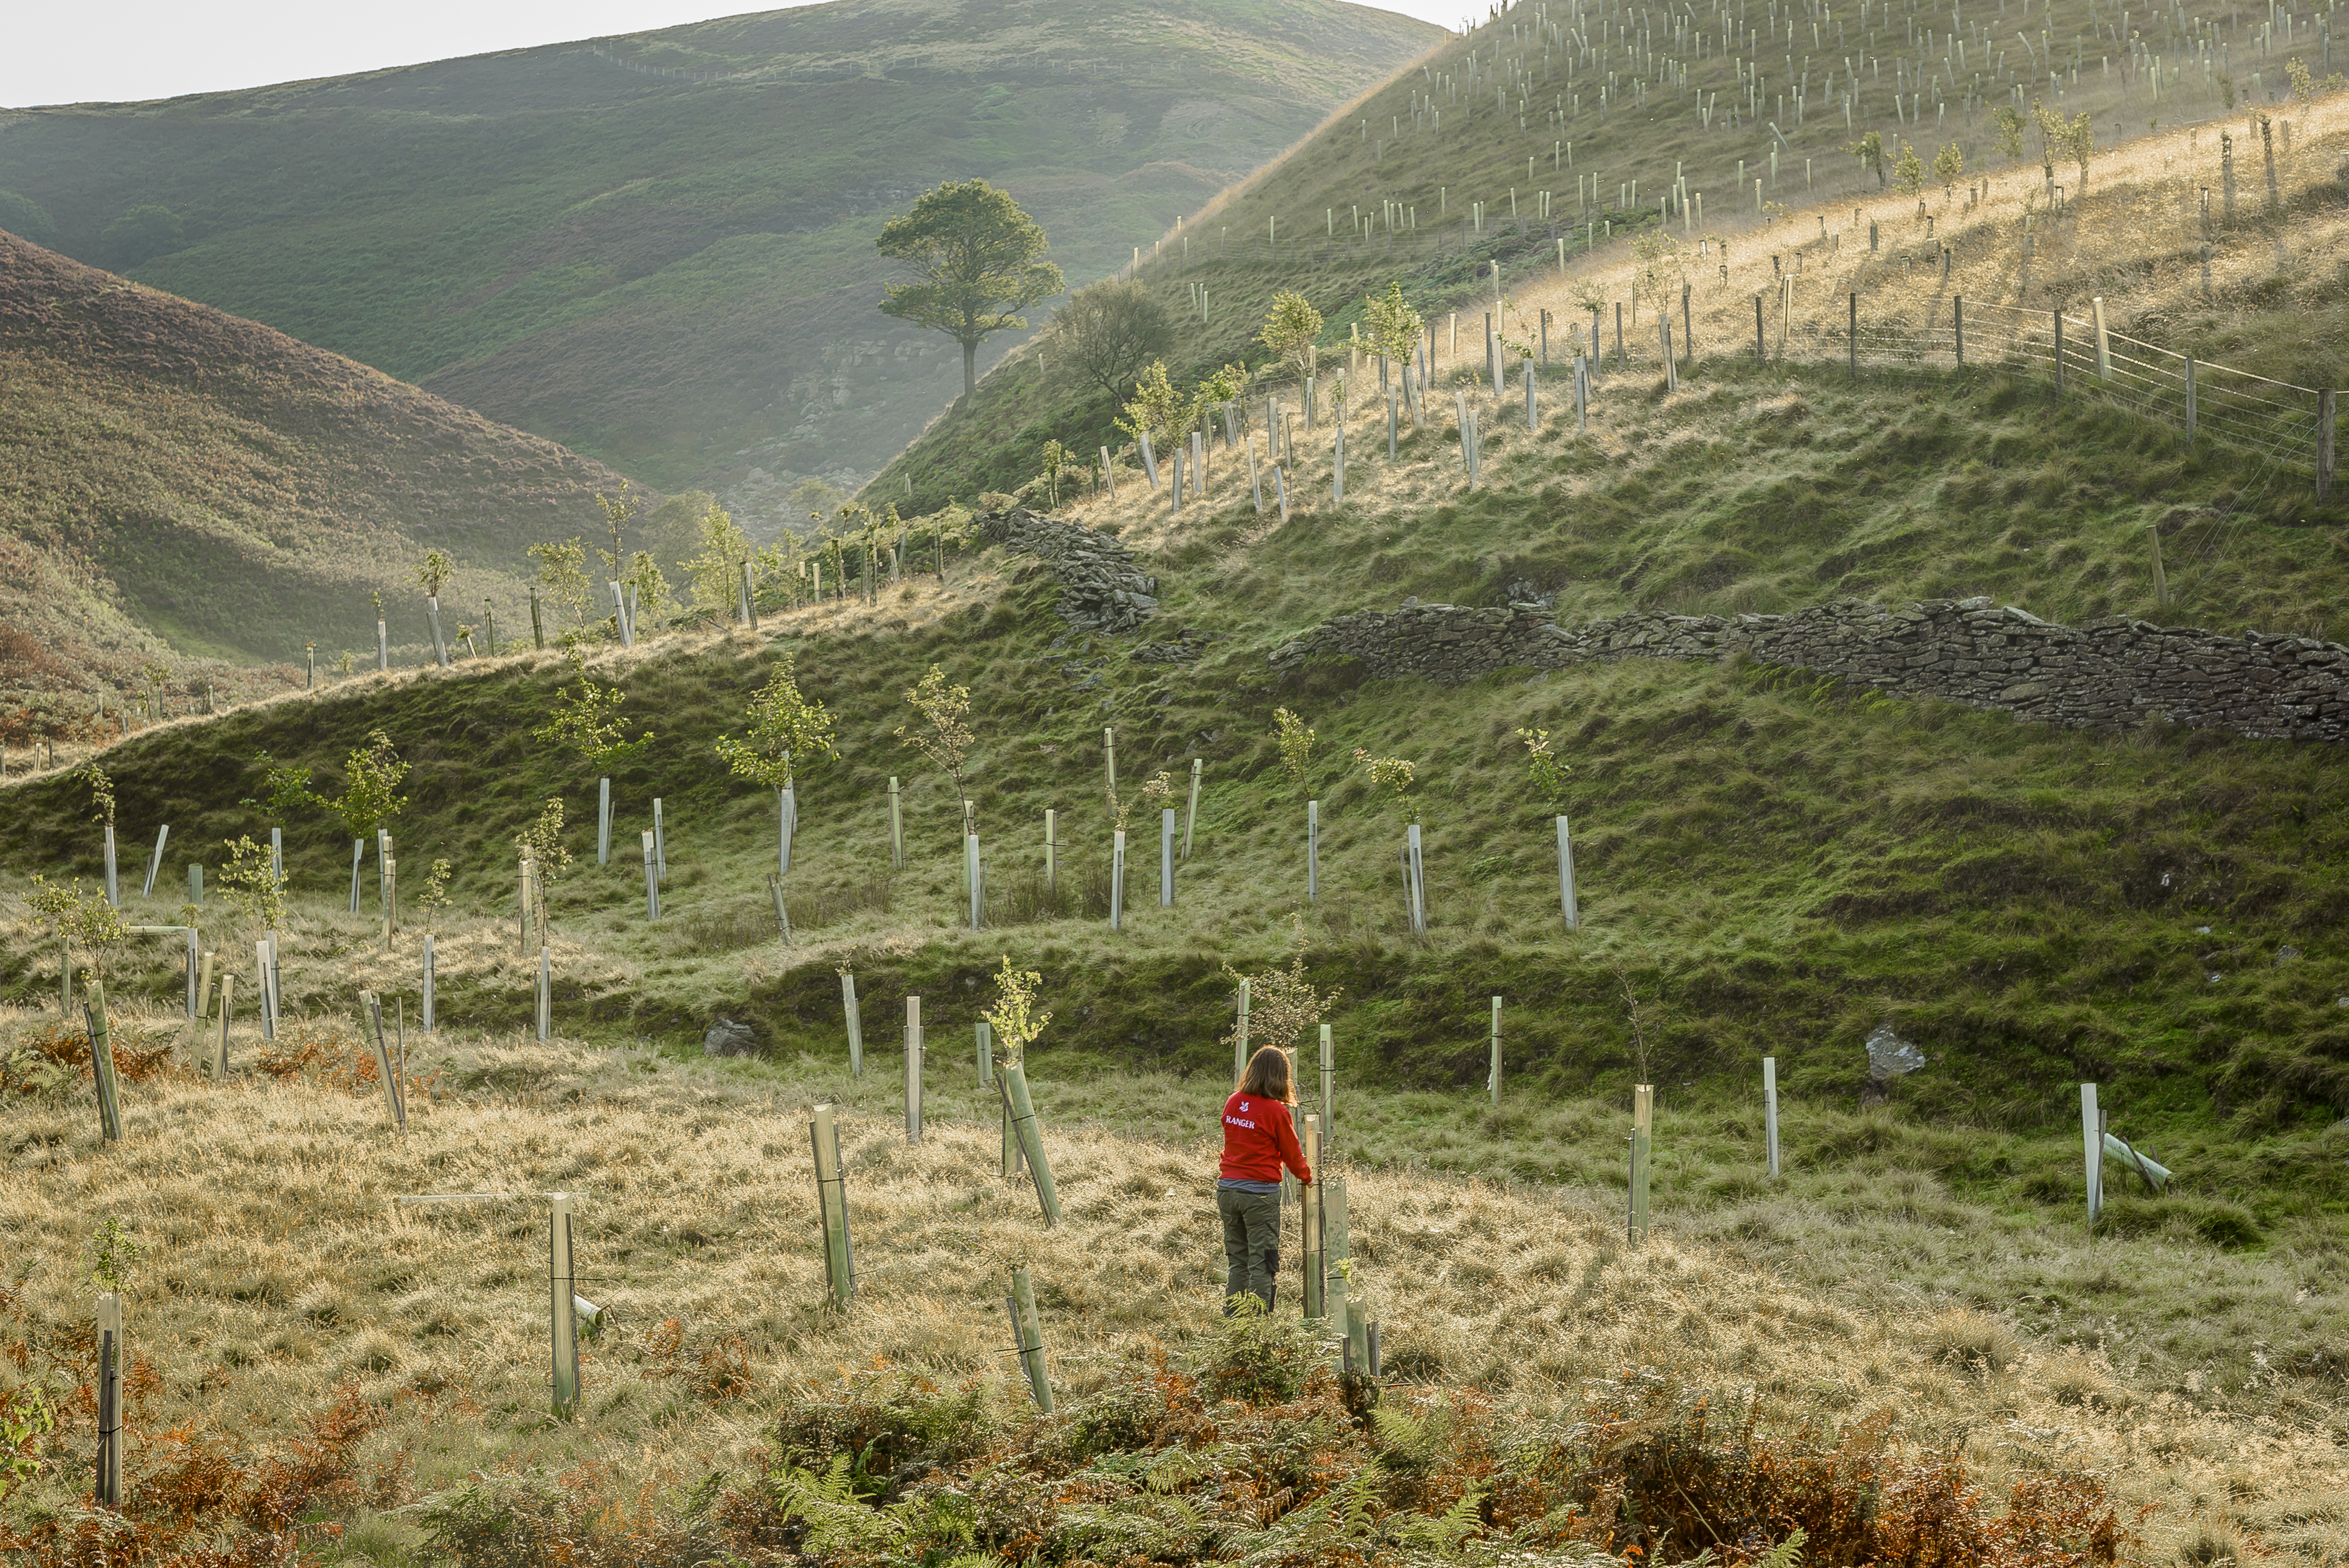 Tree planting in the Peak District (National Trust/PA)